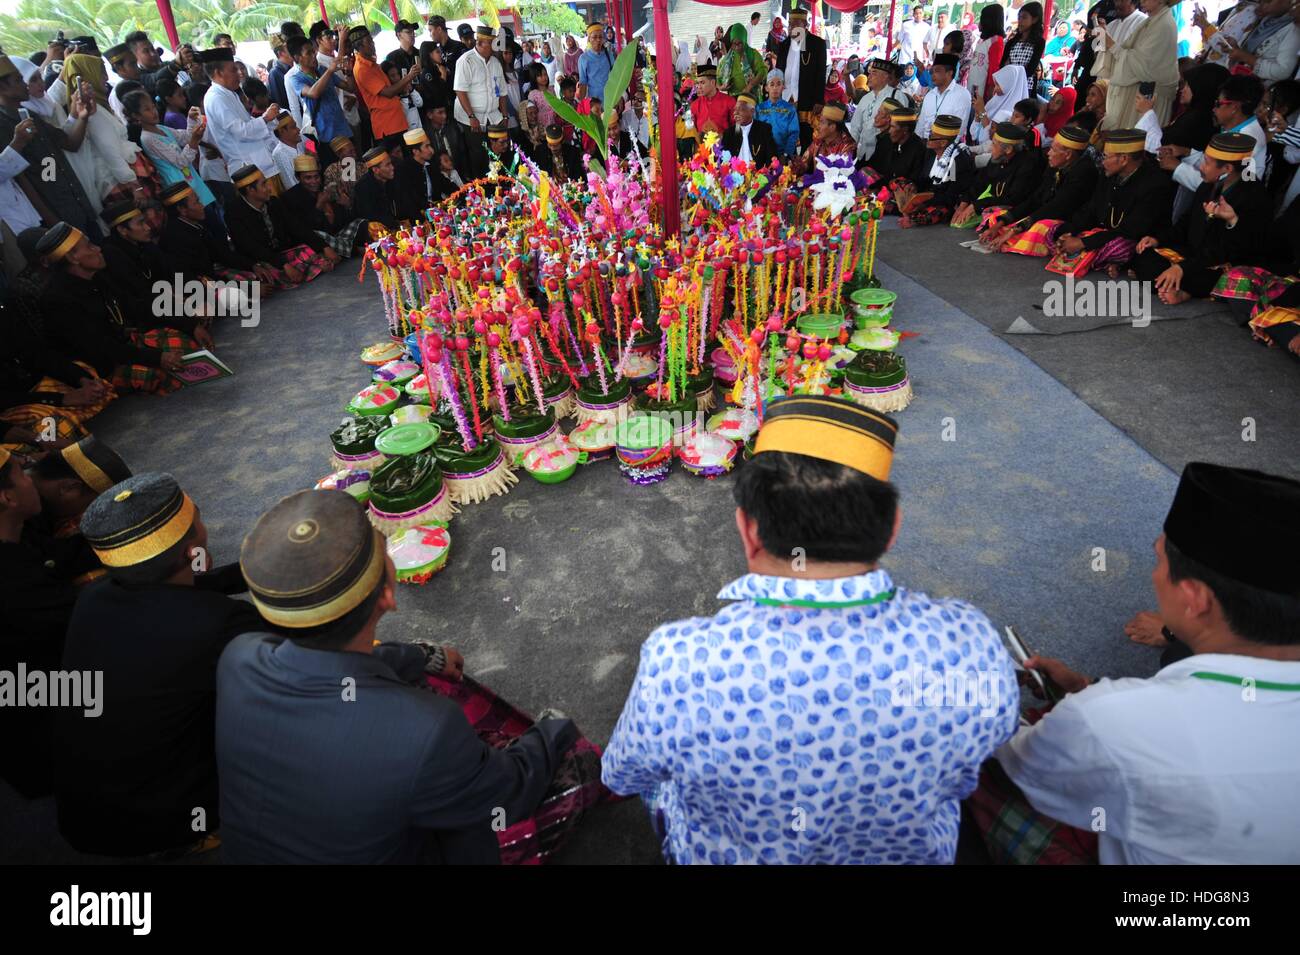 Jakarta, Indonesia. 12th Dec, 2016. Food and decorated eggs are collected during a celebration marking the birthday of the Islamic Prophet Muhammad in Jakarta, Indonesia, Dec. 12, 2016. Credit:  Zulkarnain/Xinhua/Alamy Live News Stock Photo